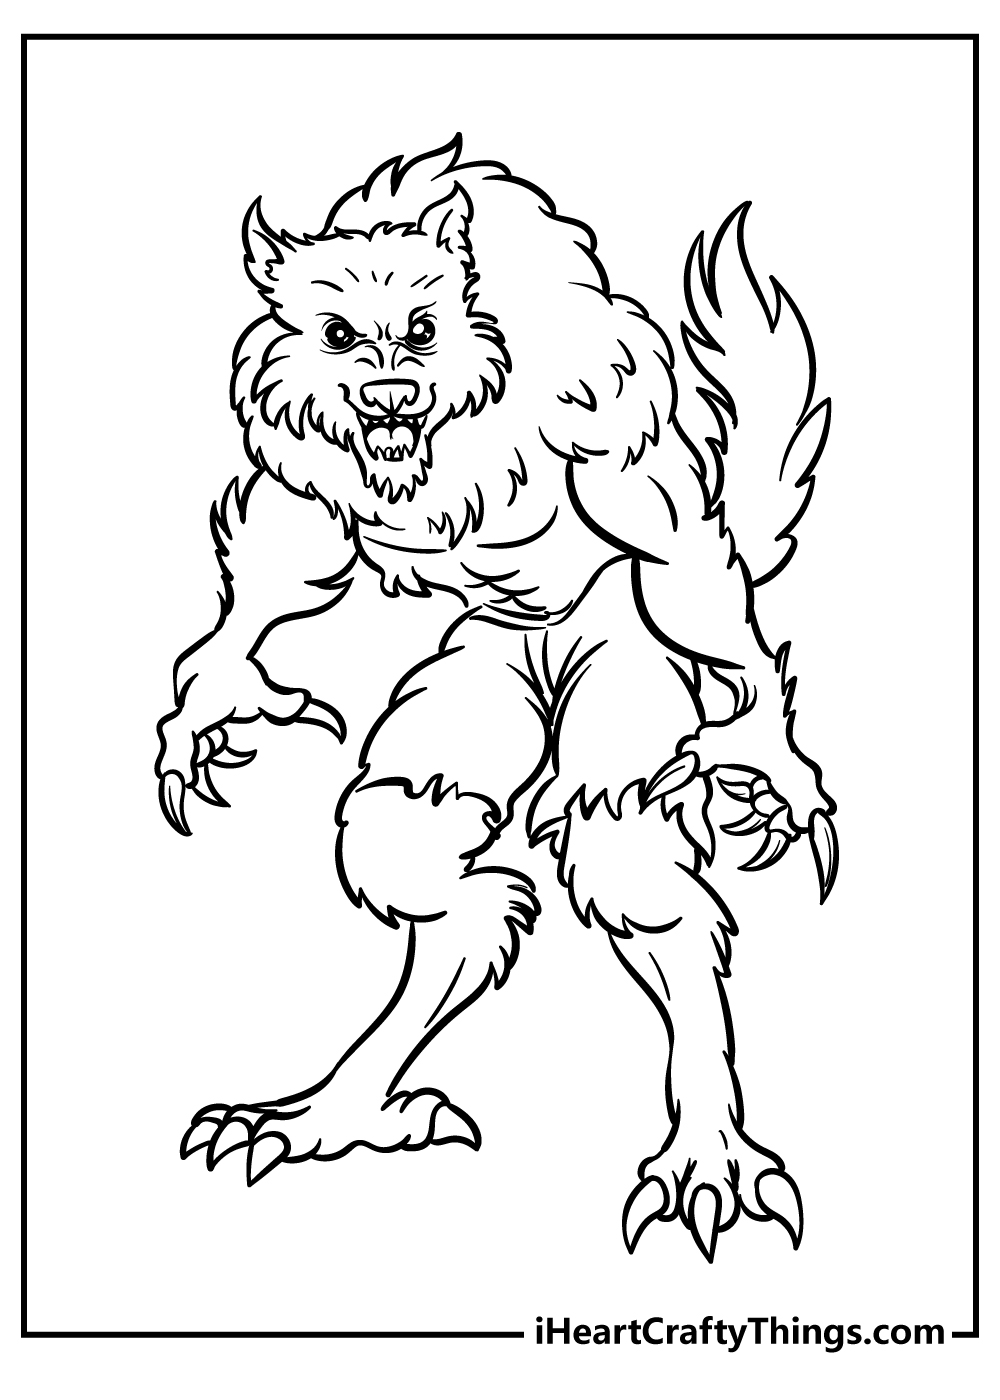 Werewolf Coloring Pages for kids free download